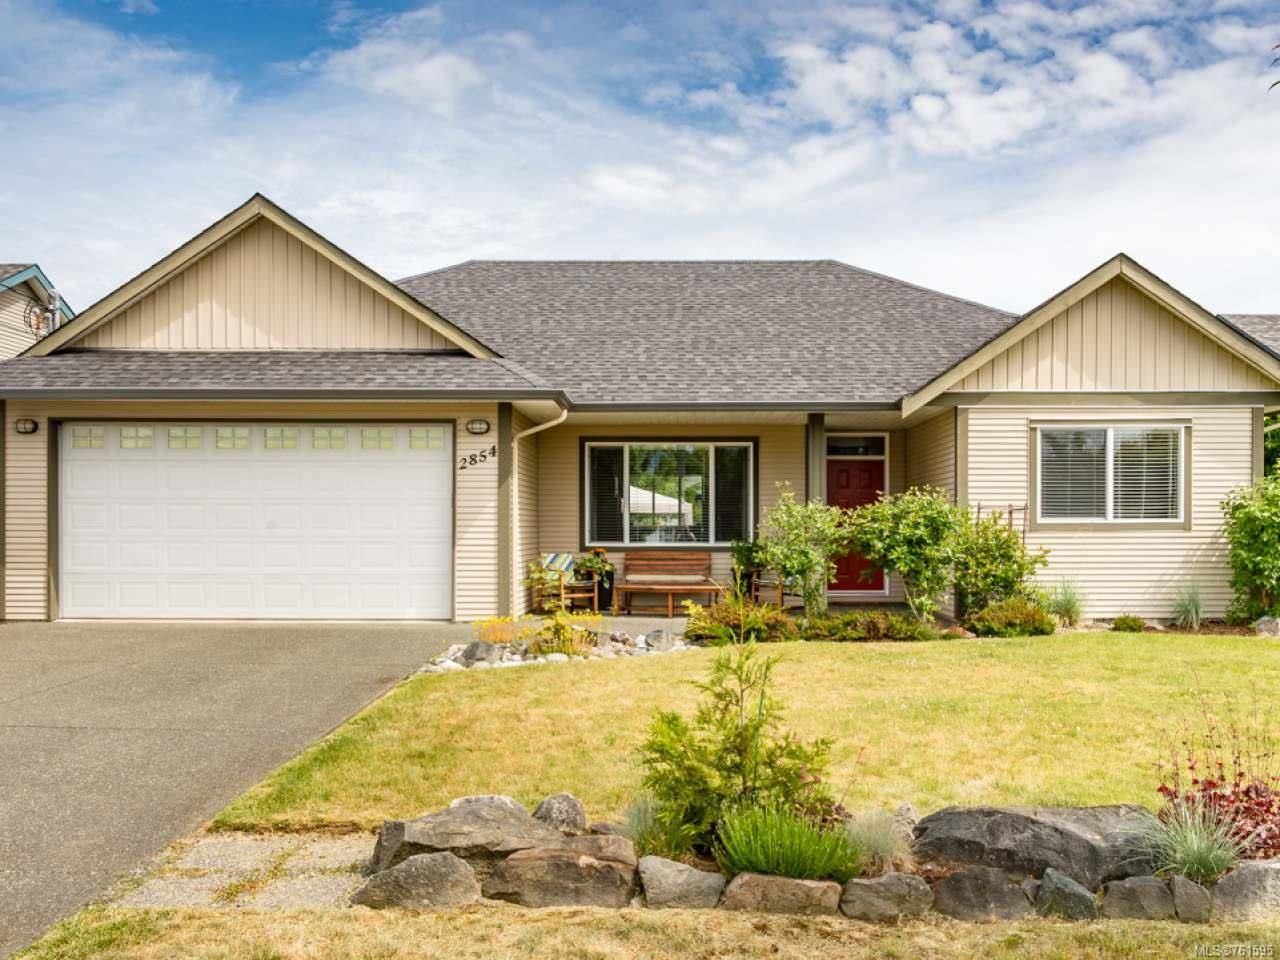 Main Photo: 2854 Ulverston Ave in CUMBERLAND: CV Cumberland House for sale (Comox Valley)  : MLS®# 761595